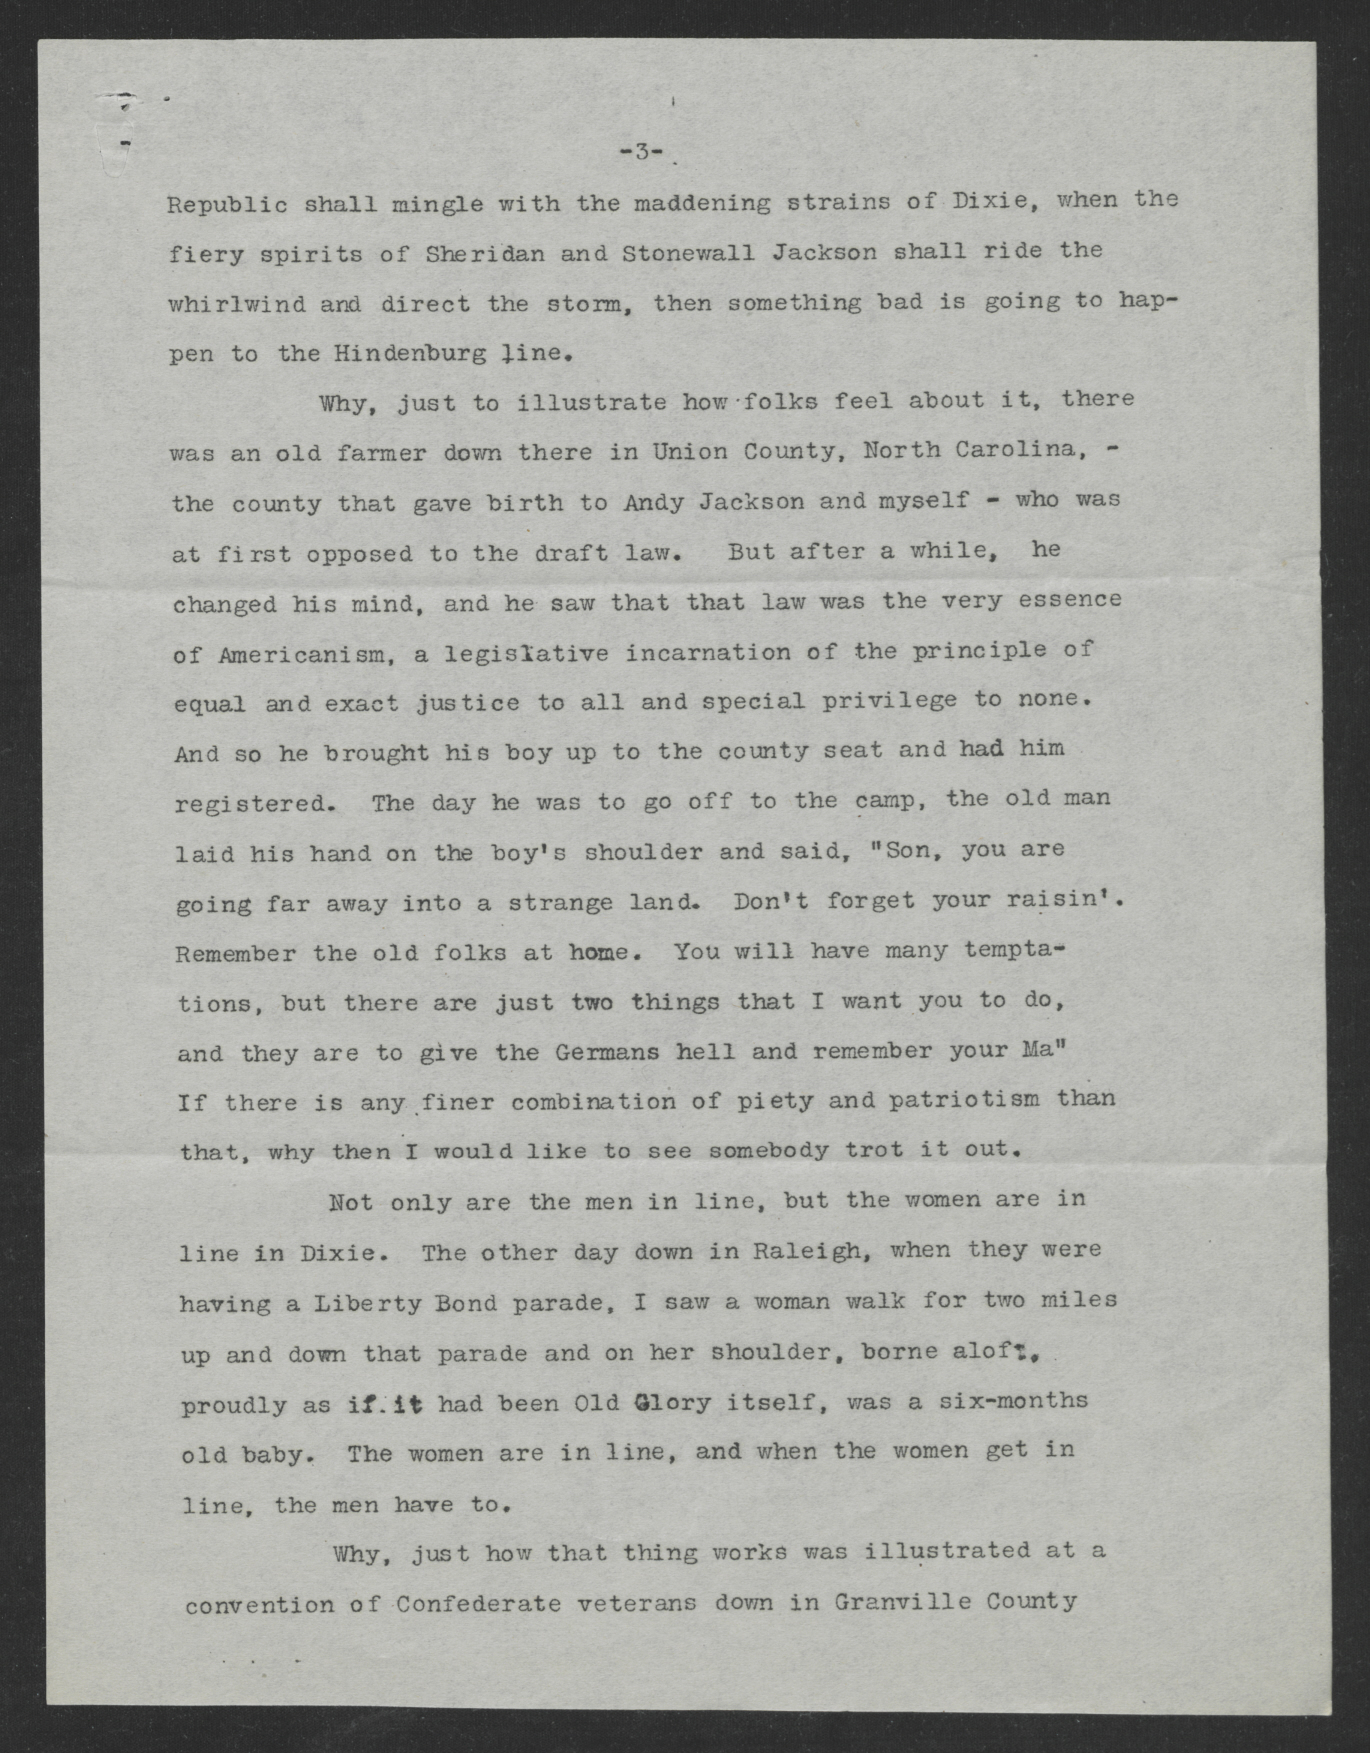 Address Delivered to the Conference of Governors by Governor Thomas W. Bickett, May 17, 1918, page 3